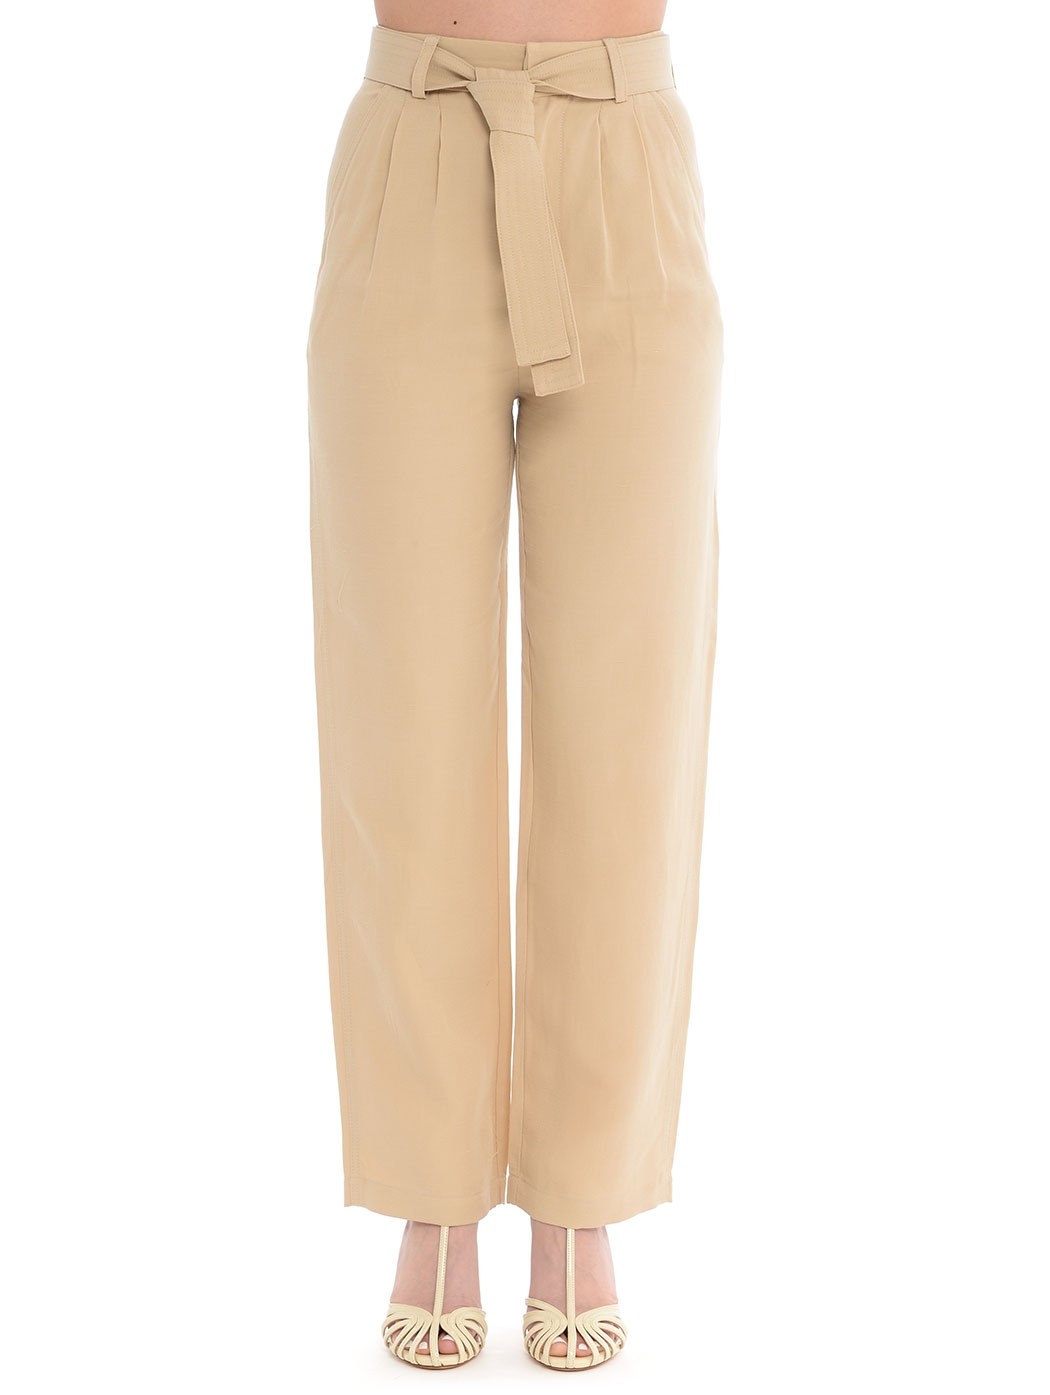  WOMAN TROUSERS,PALAZZO TROUSERS,SKINNY TROUSERS,MARNI TROUSERS,FORTE FORTE TROUSERS,8PM TROUSERS,MSGM TROUSERS,CROP PANTS  WOOLRICH WWTR0151FR